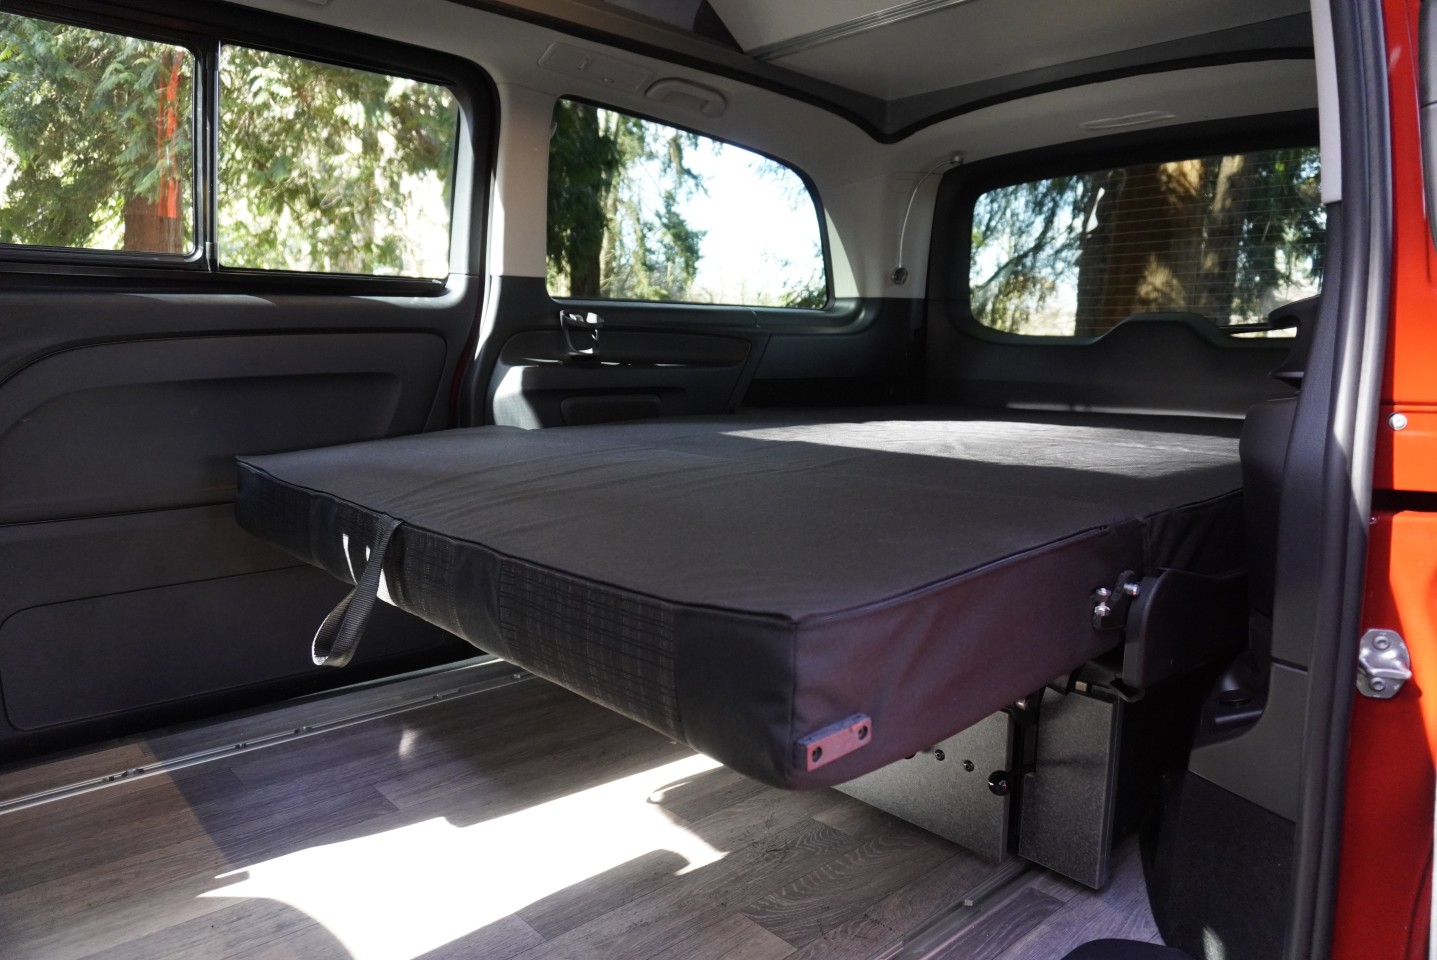 With a couple of moves, the double bed folds down in the rear cabin